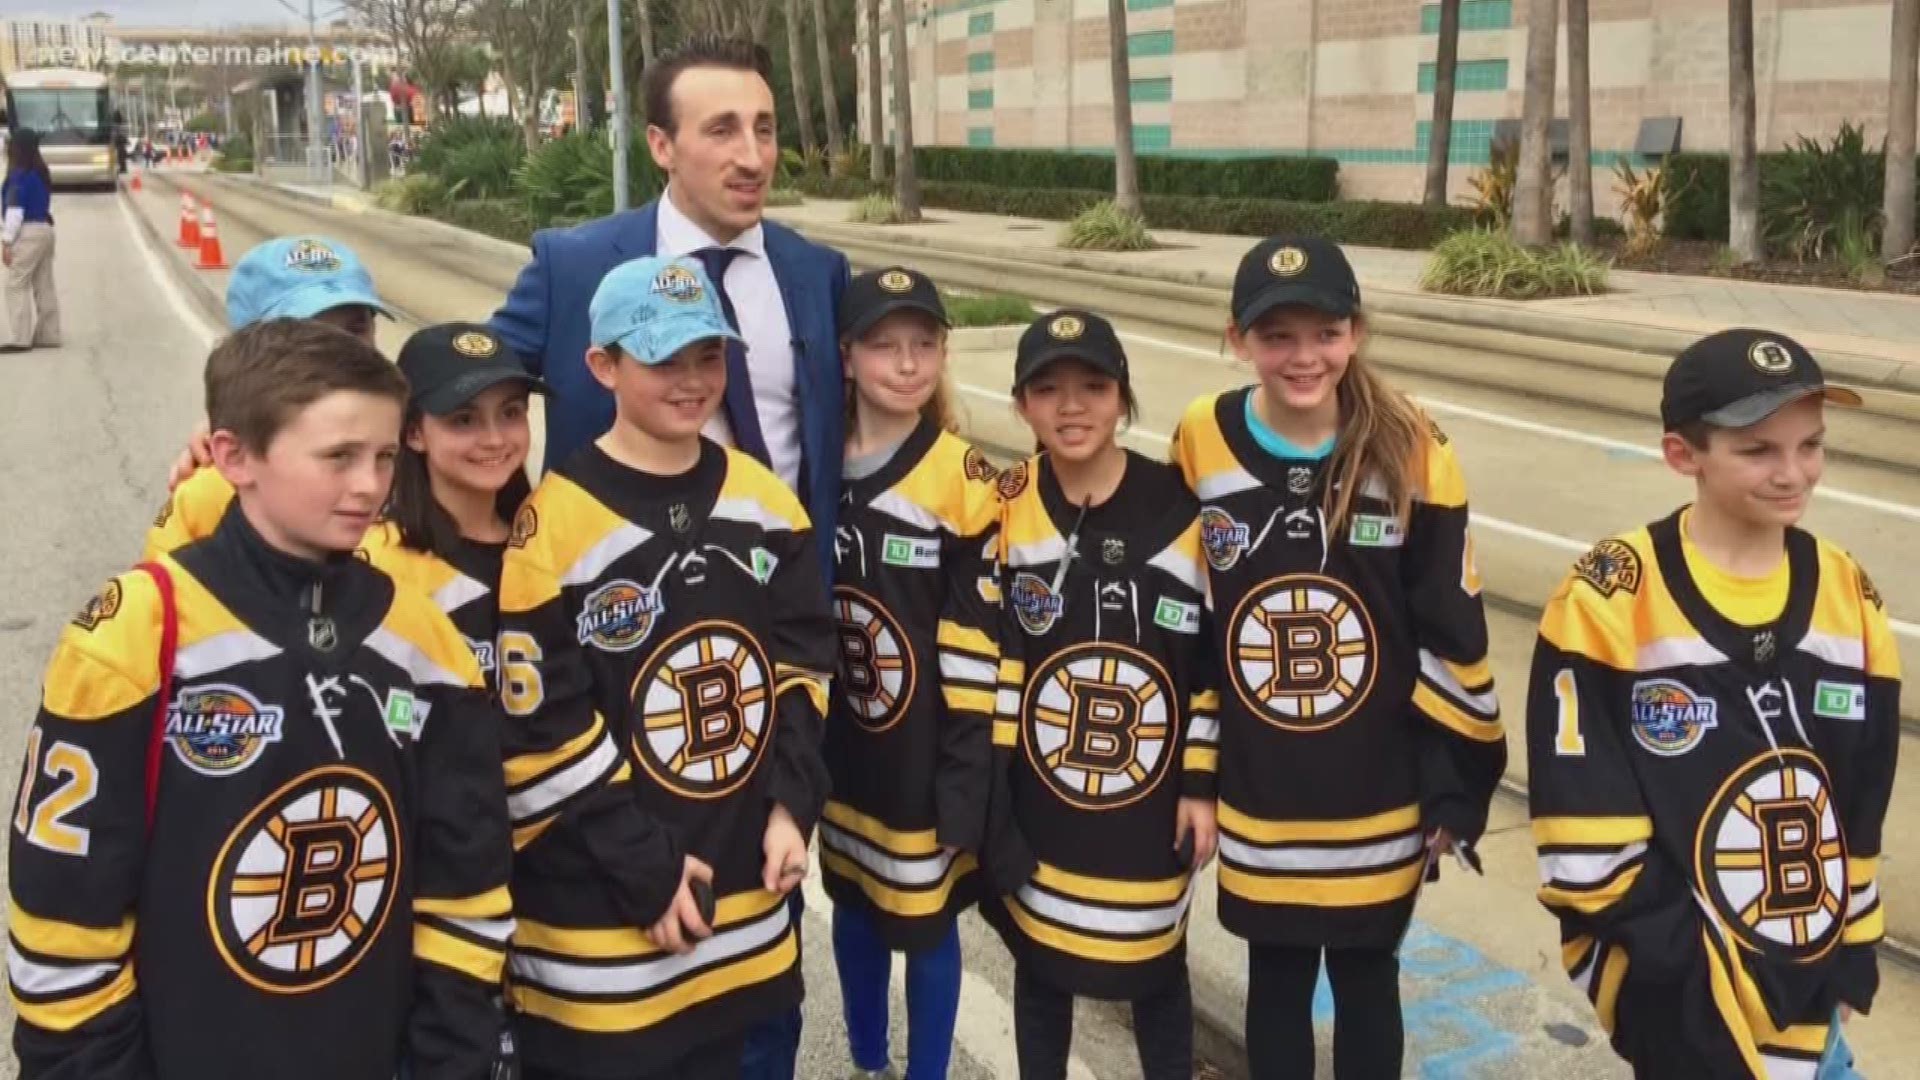 Brad Marchand rewarded four Maine kids with autographed hockey sticks for helping him with his equipment at the airport.